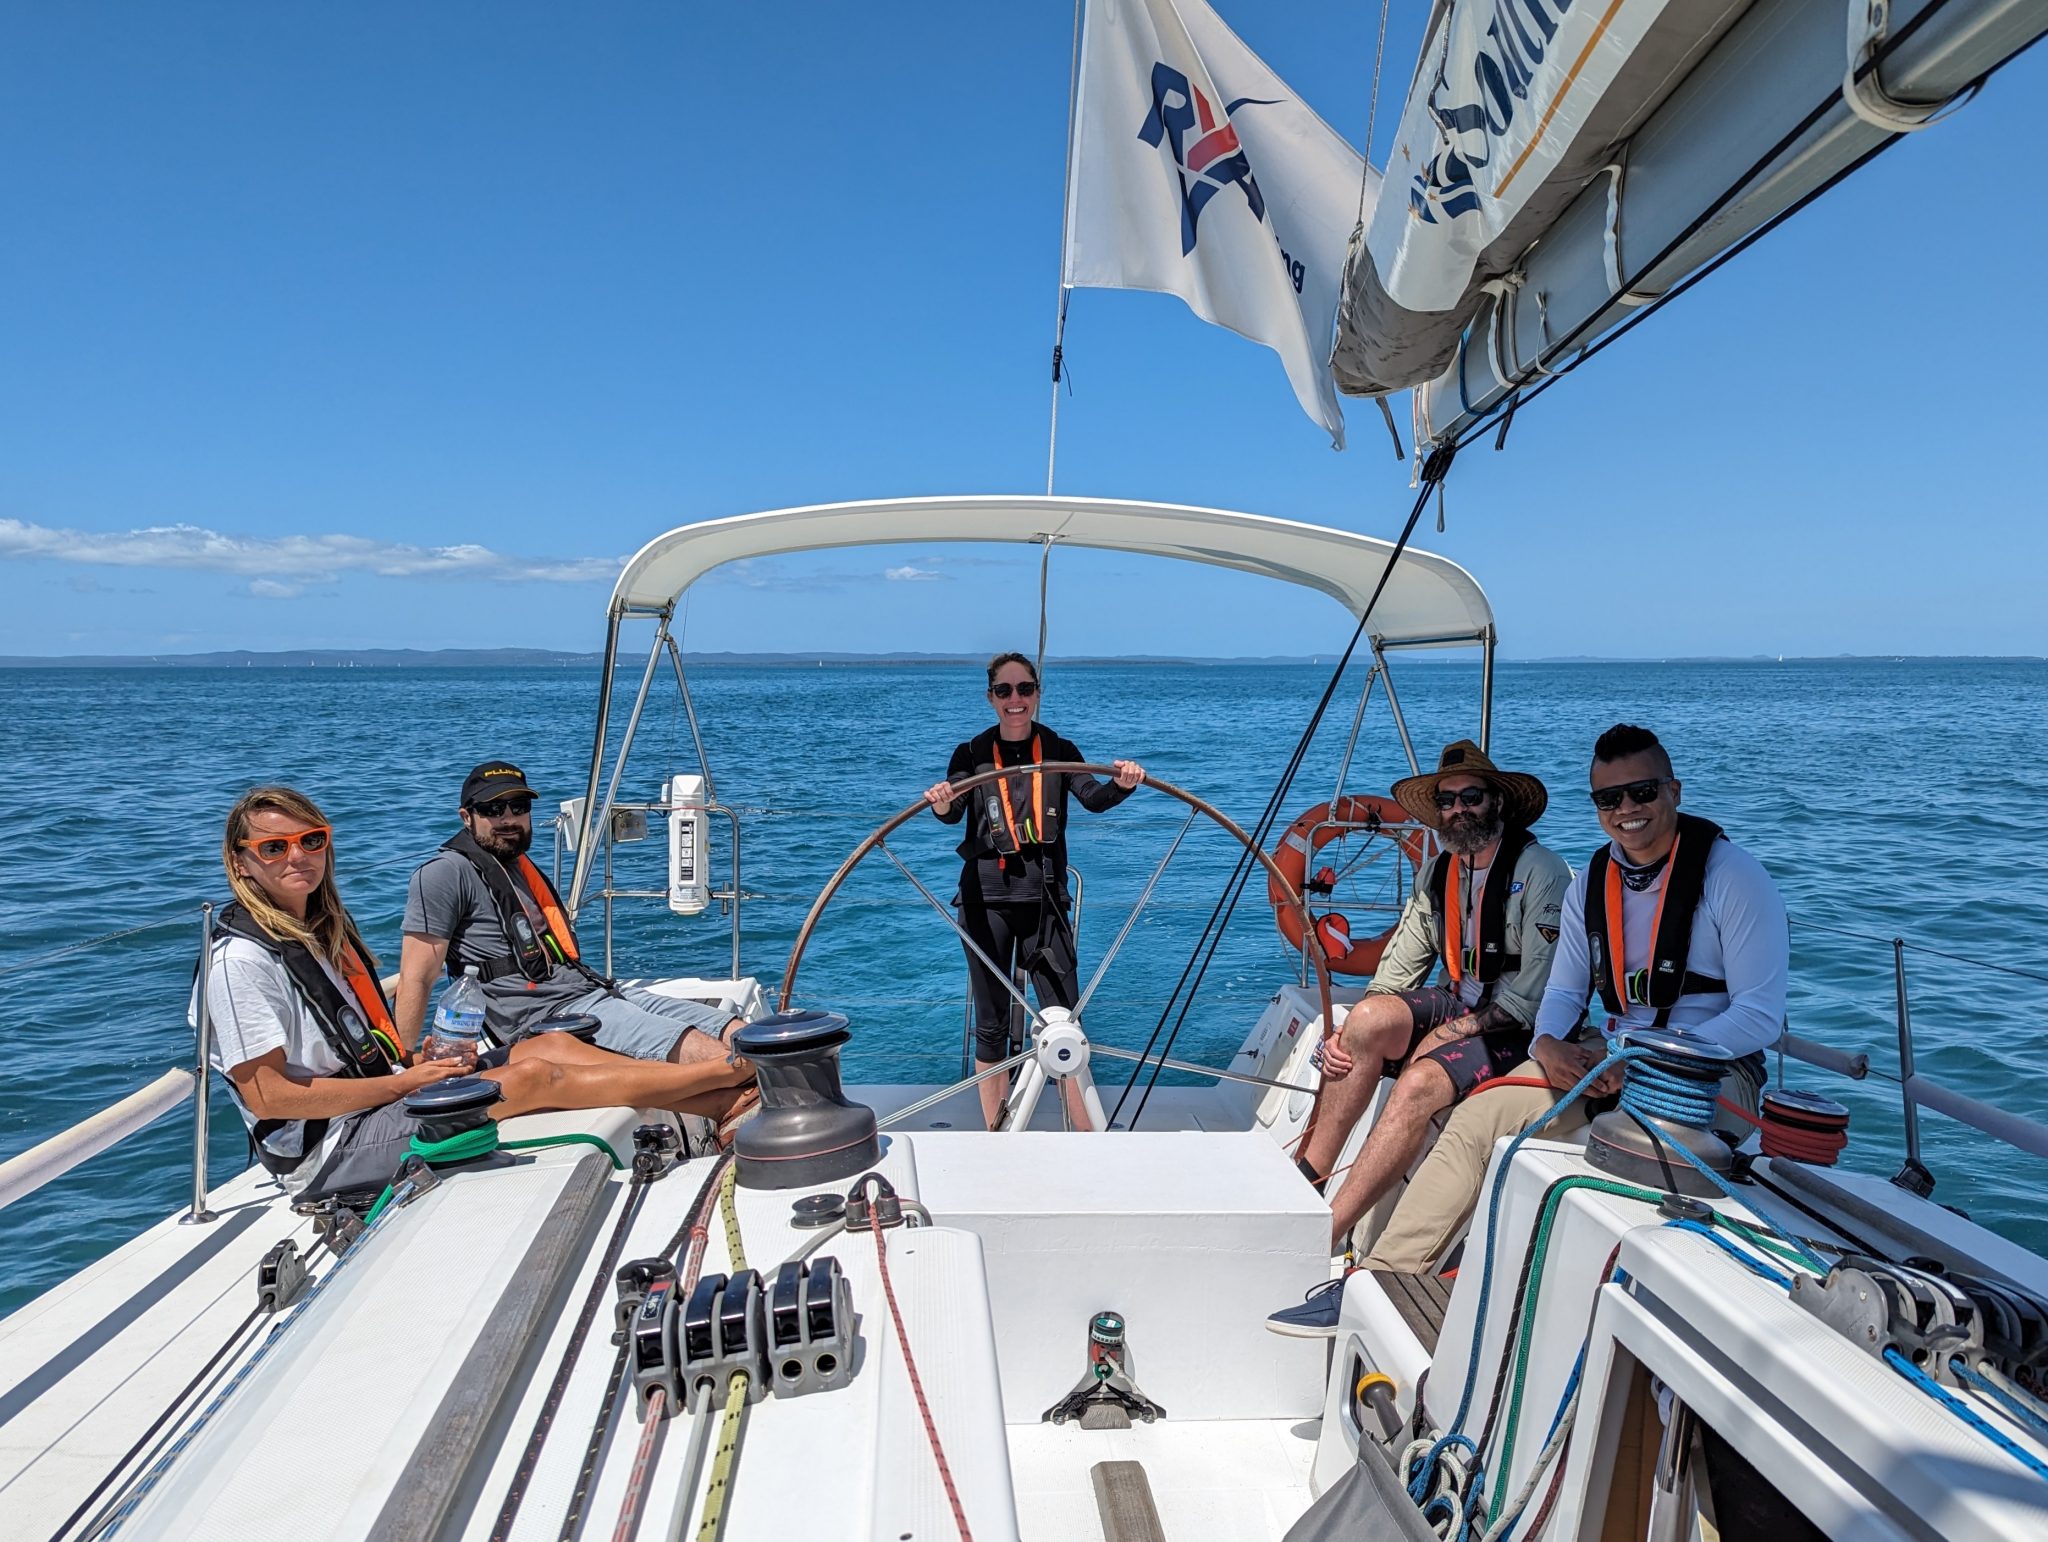 Sail boat on the ocean | Featured image for Intermediate Sailing Courses – Intermediate Sailing Page from Southern Cross Yachting. 